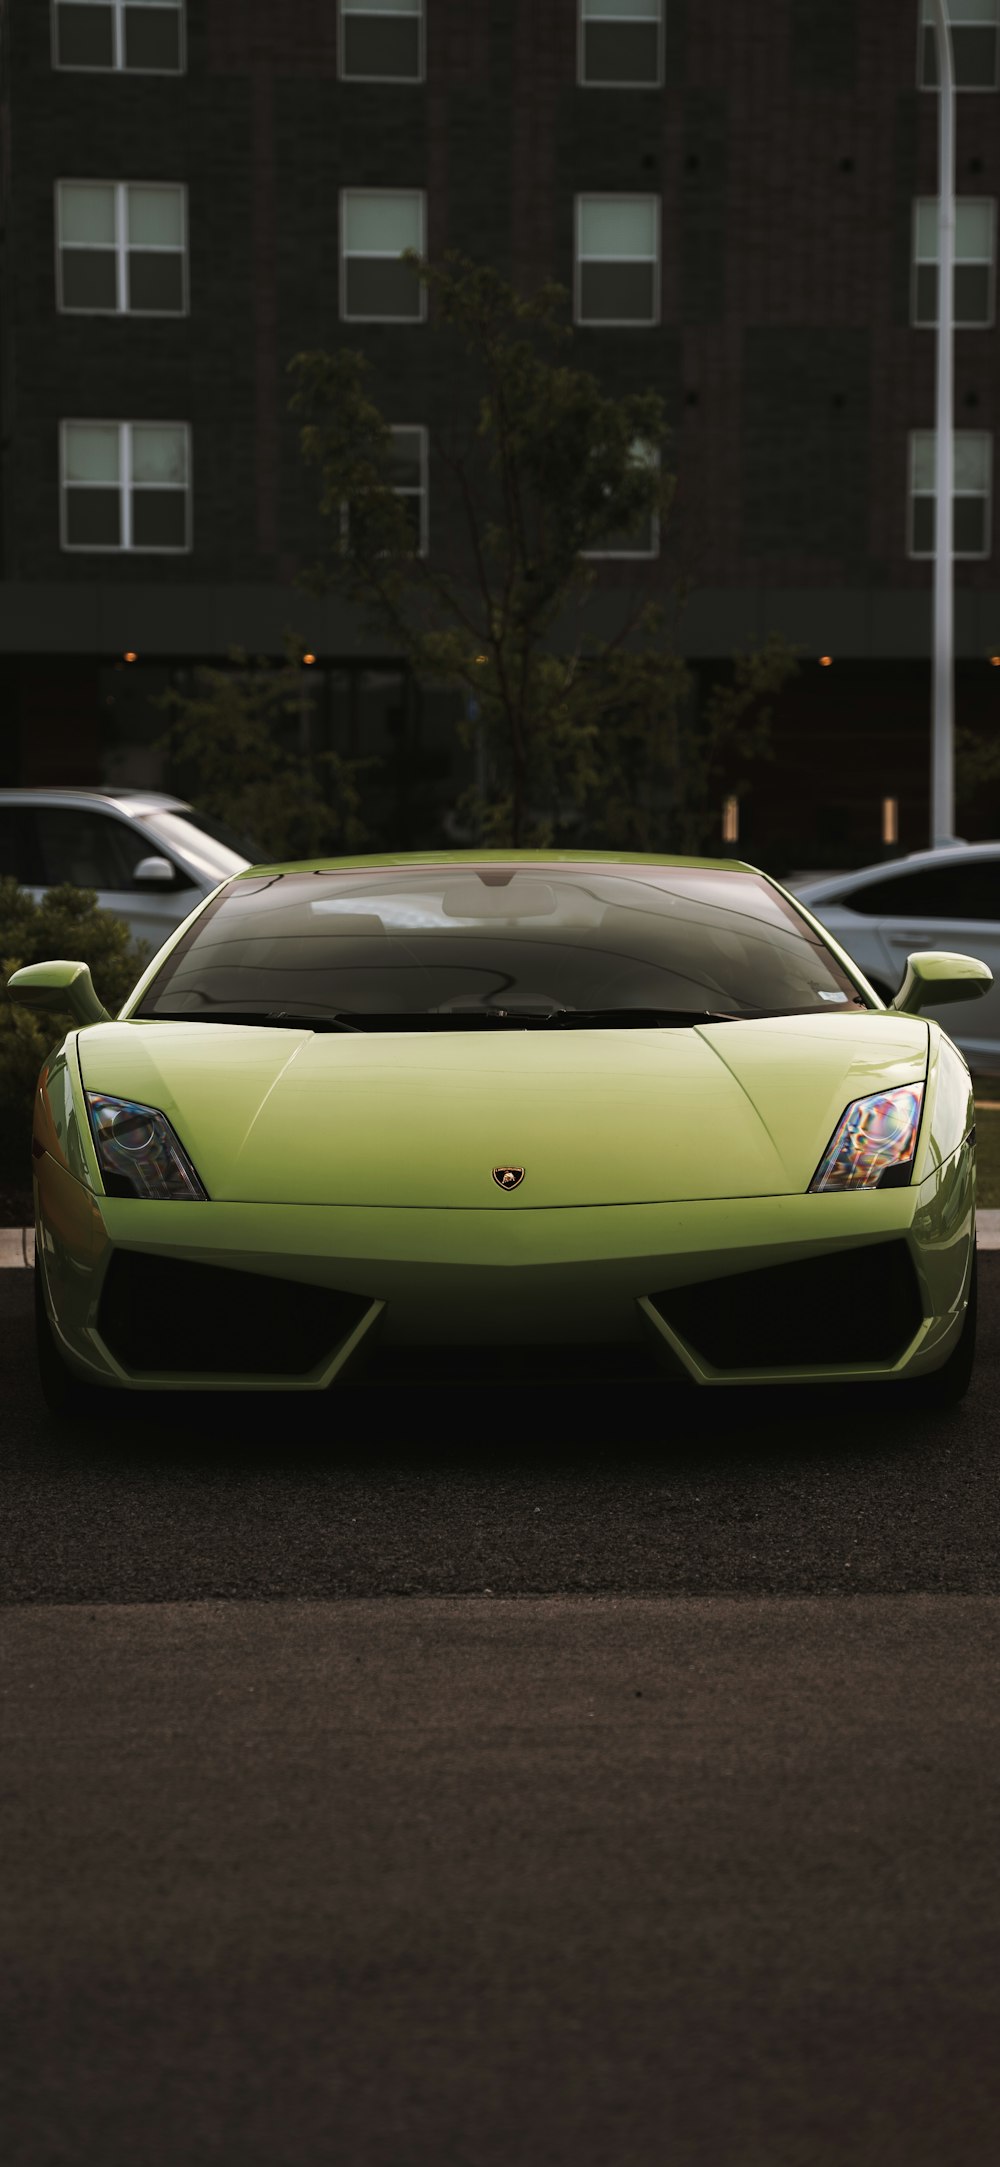 a lime green sports car parked in a parking lot